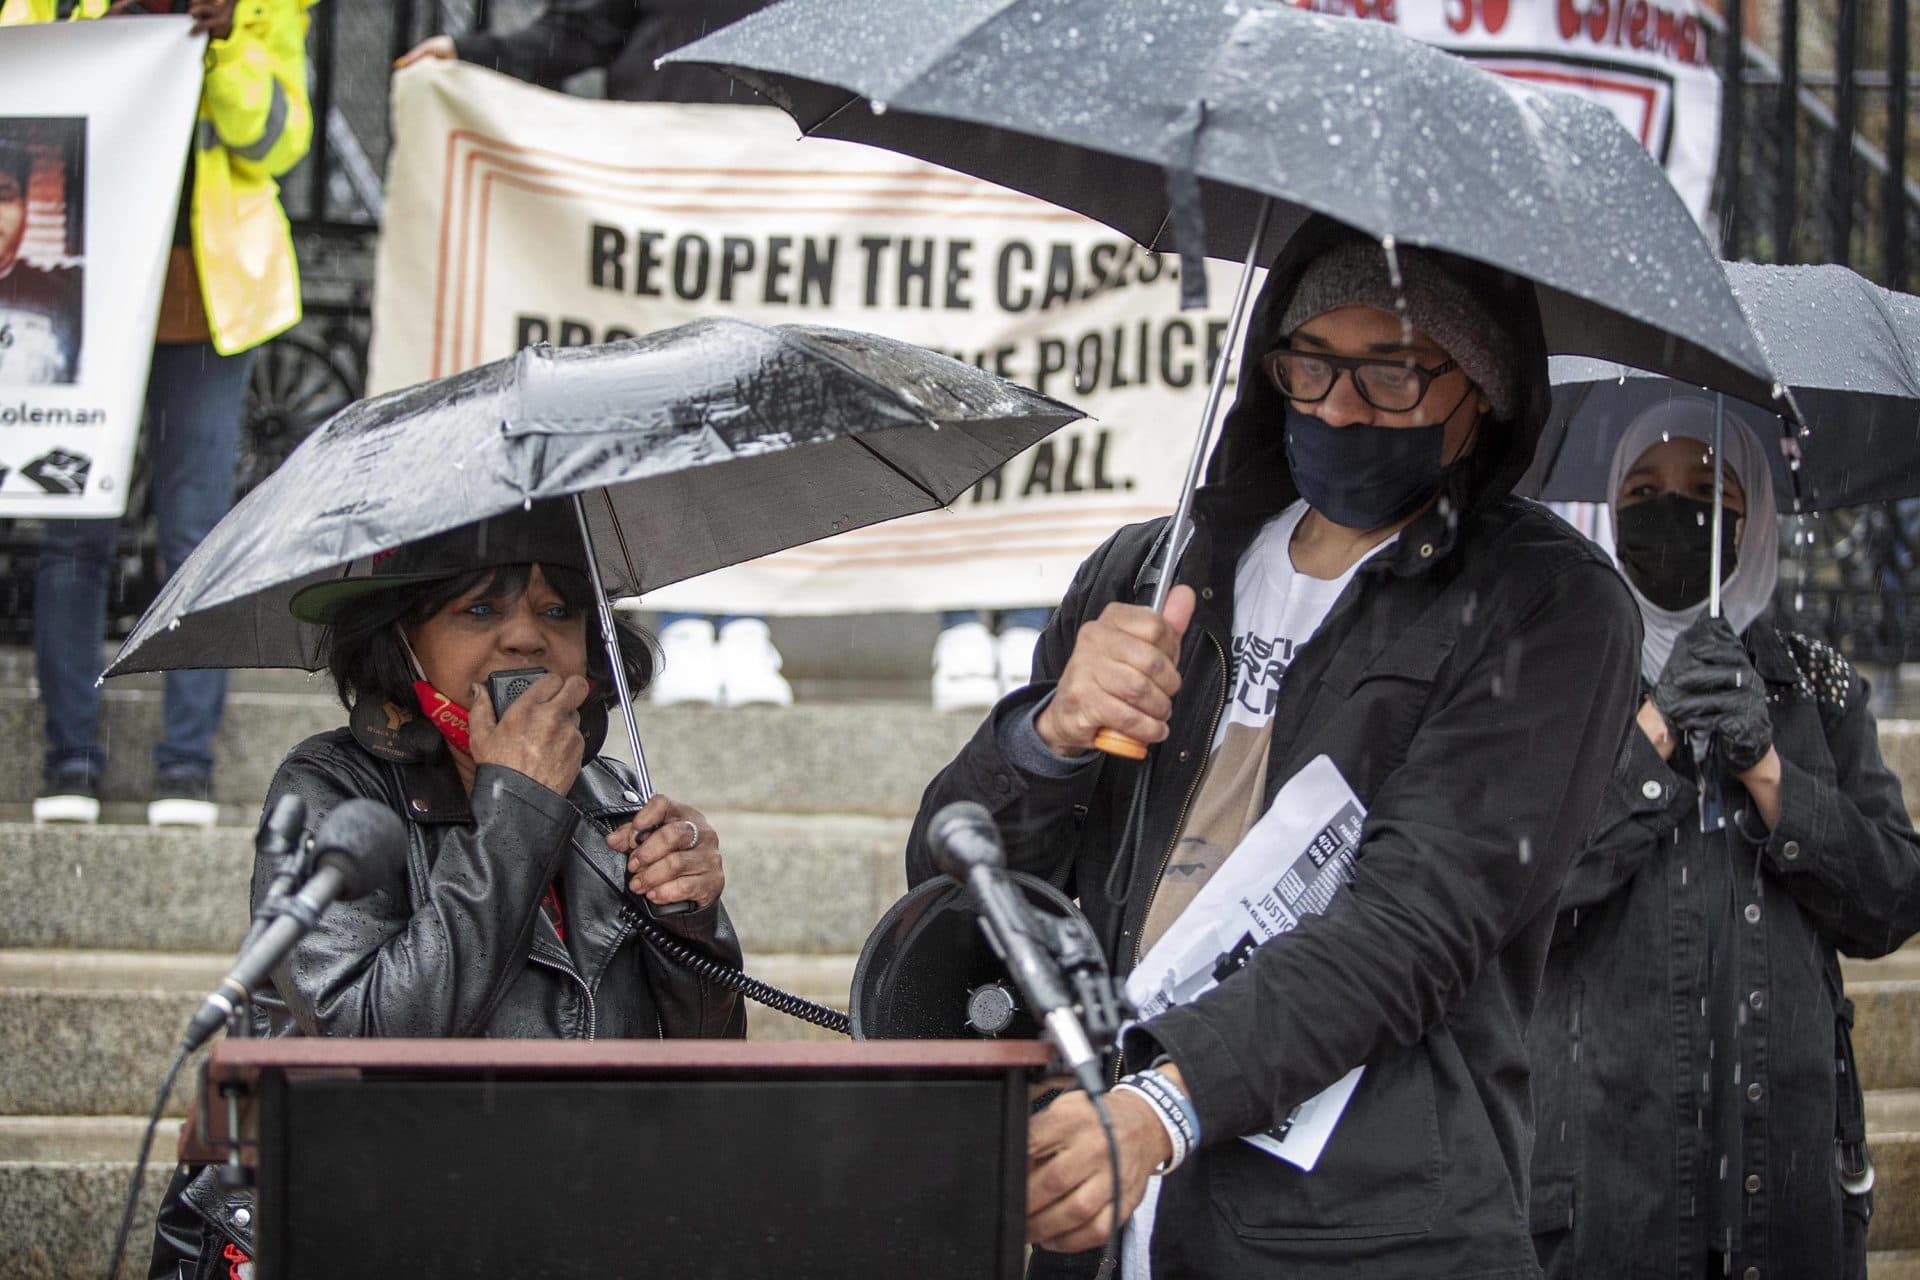 Hope Coleman, mother of Terrence Coleman who was killed by police in 2016, speaks to the crowd gathered in the rain outside the Massachusetts State House. (Robin Lubbock/WBUR)